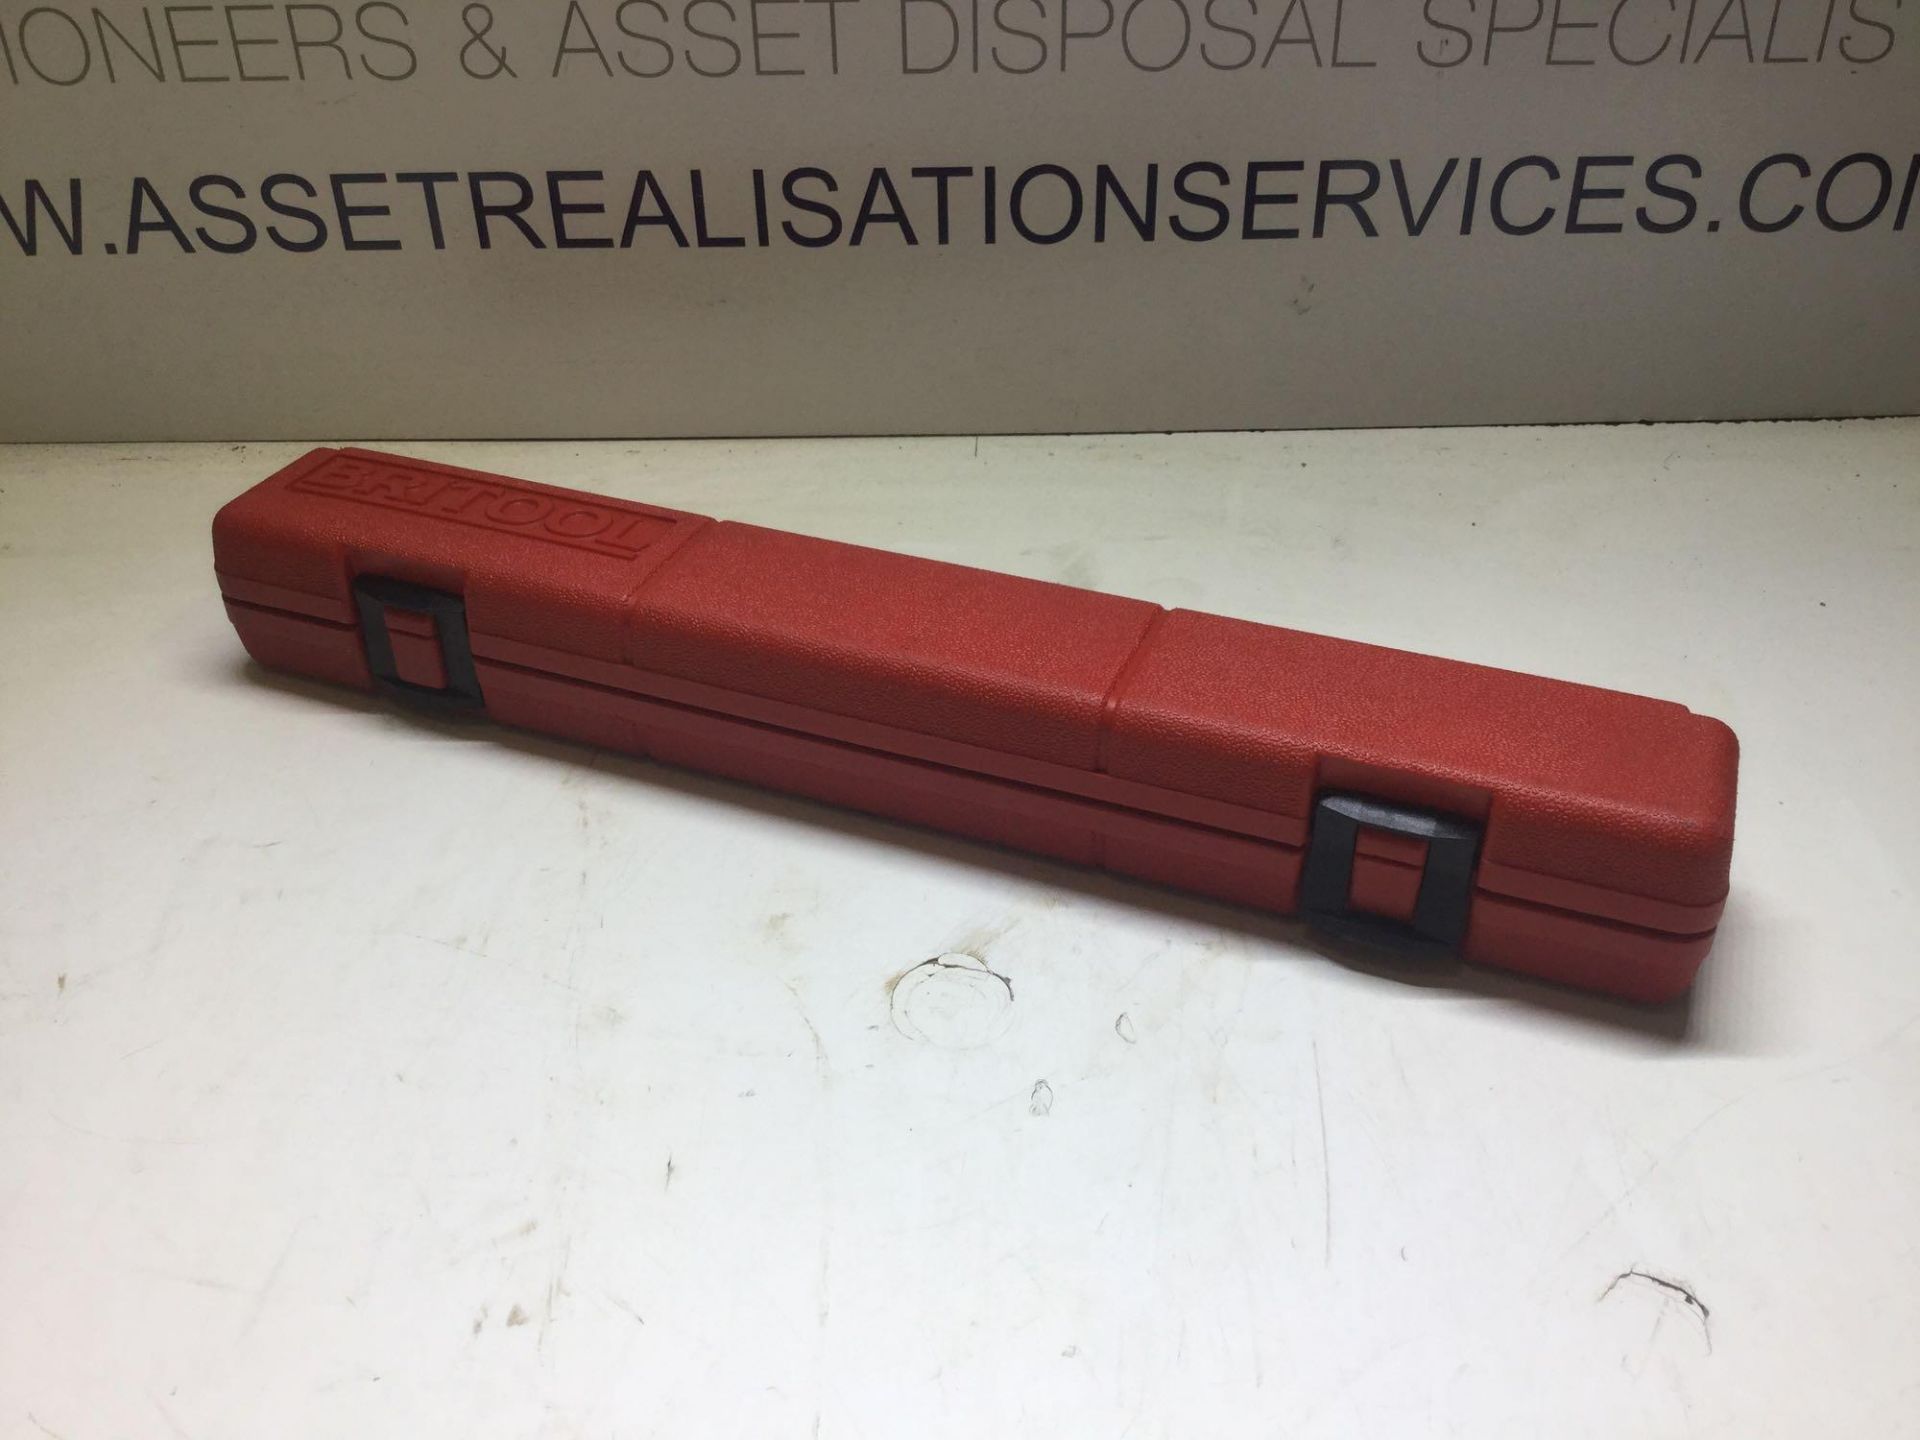 Britool 3/8 Torque Wrench (New In Box) - Image 4 of 4